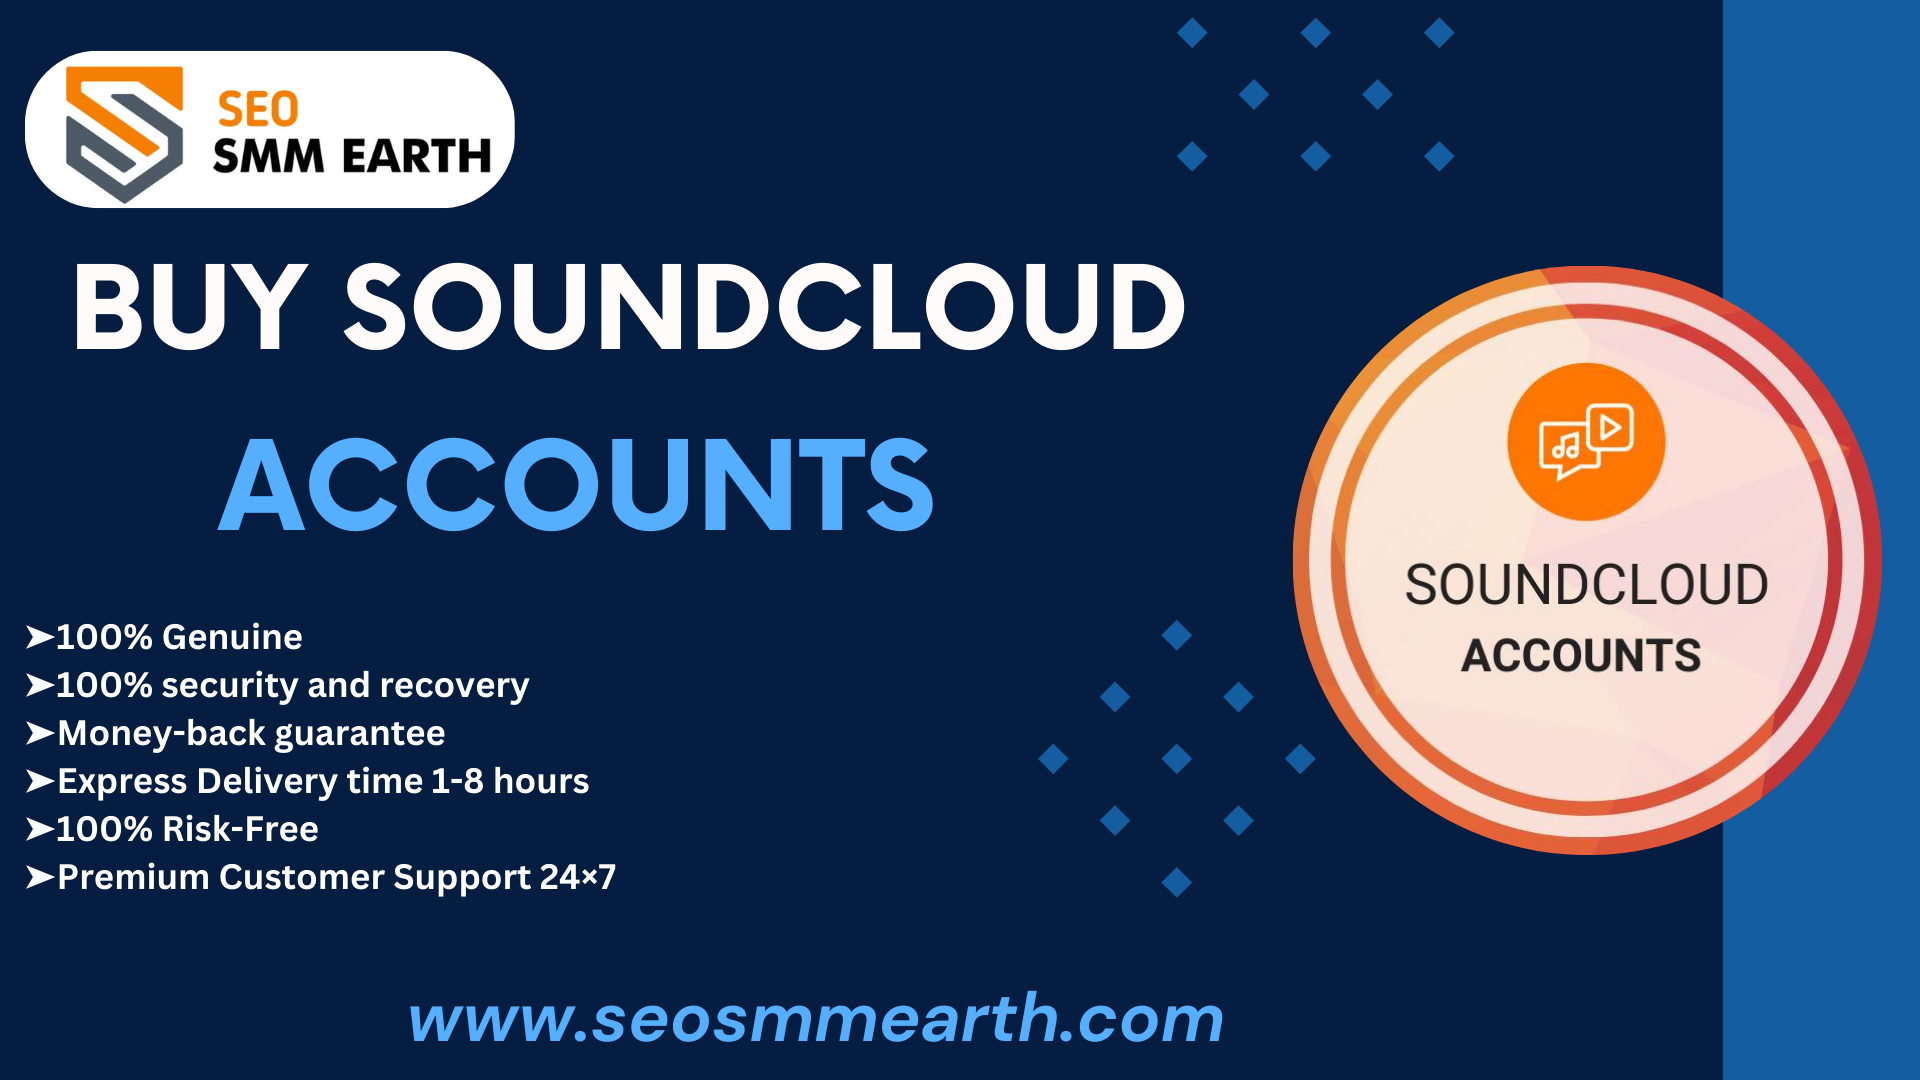 Buy Soundcloud Accounts - From 100% Trusted Seller SEOSMMEARTH